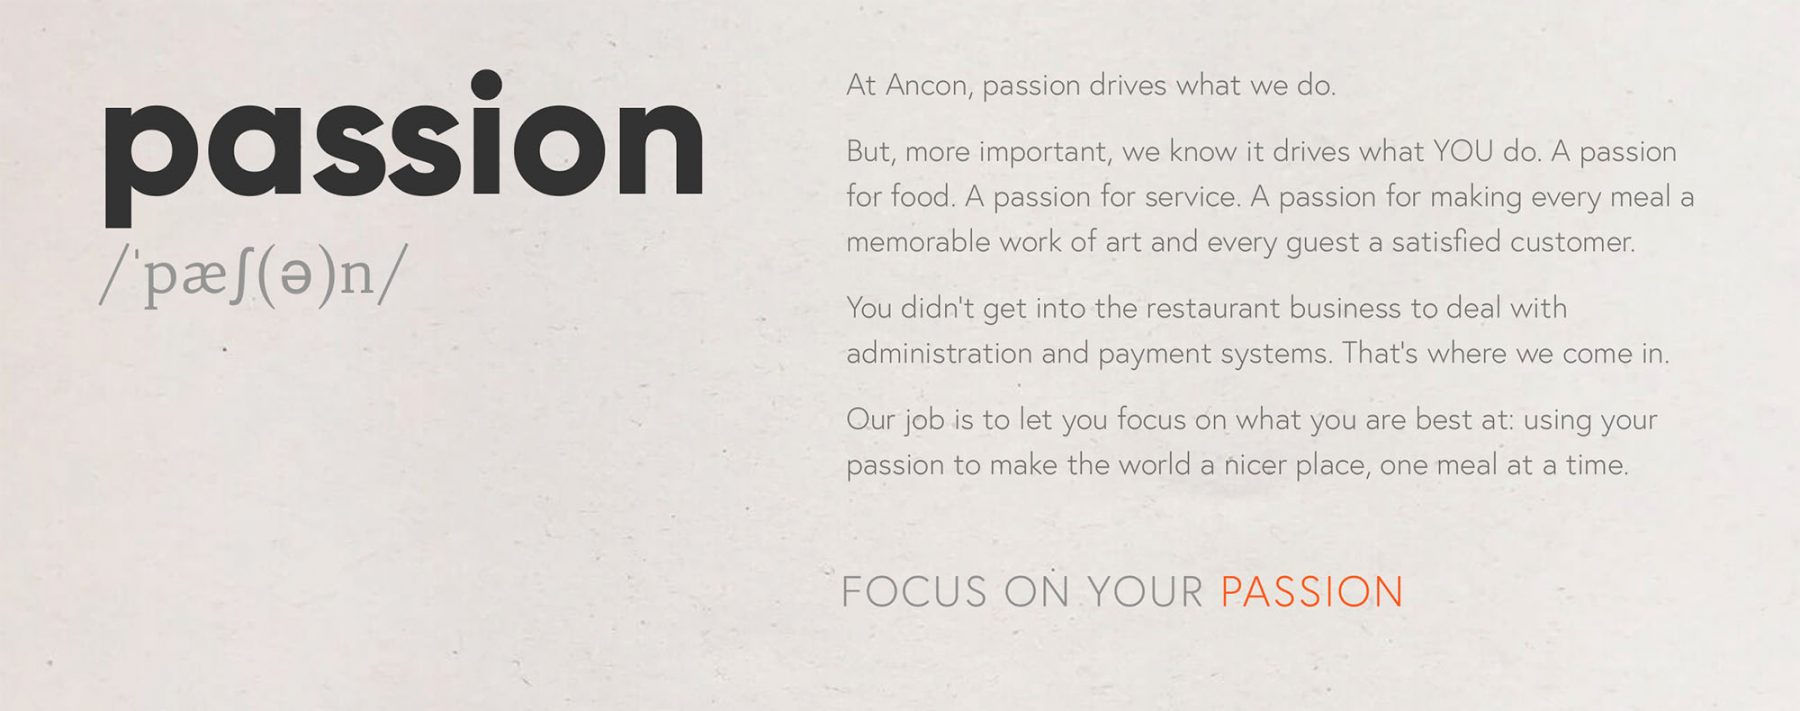 Copywriting from the Ancon web site